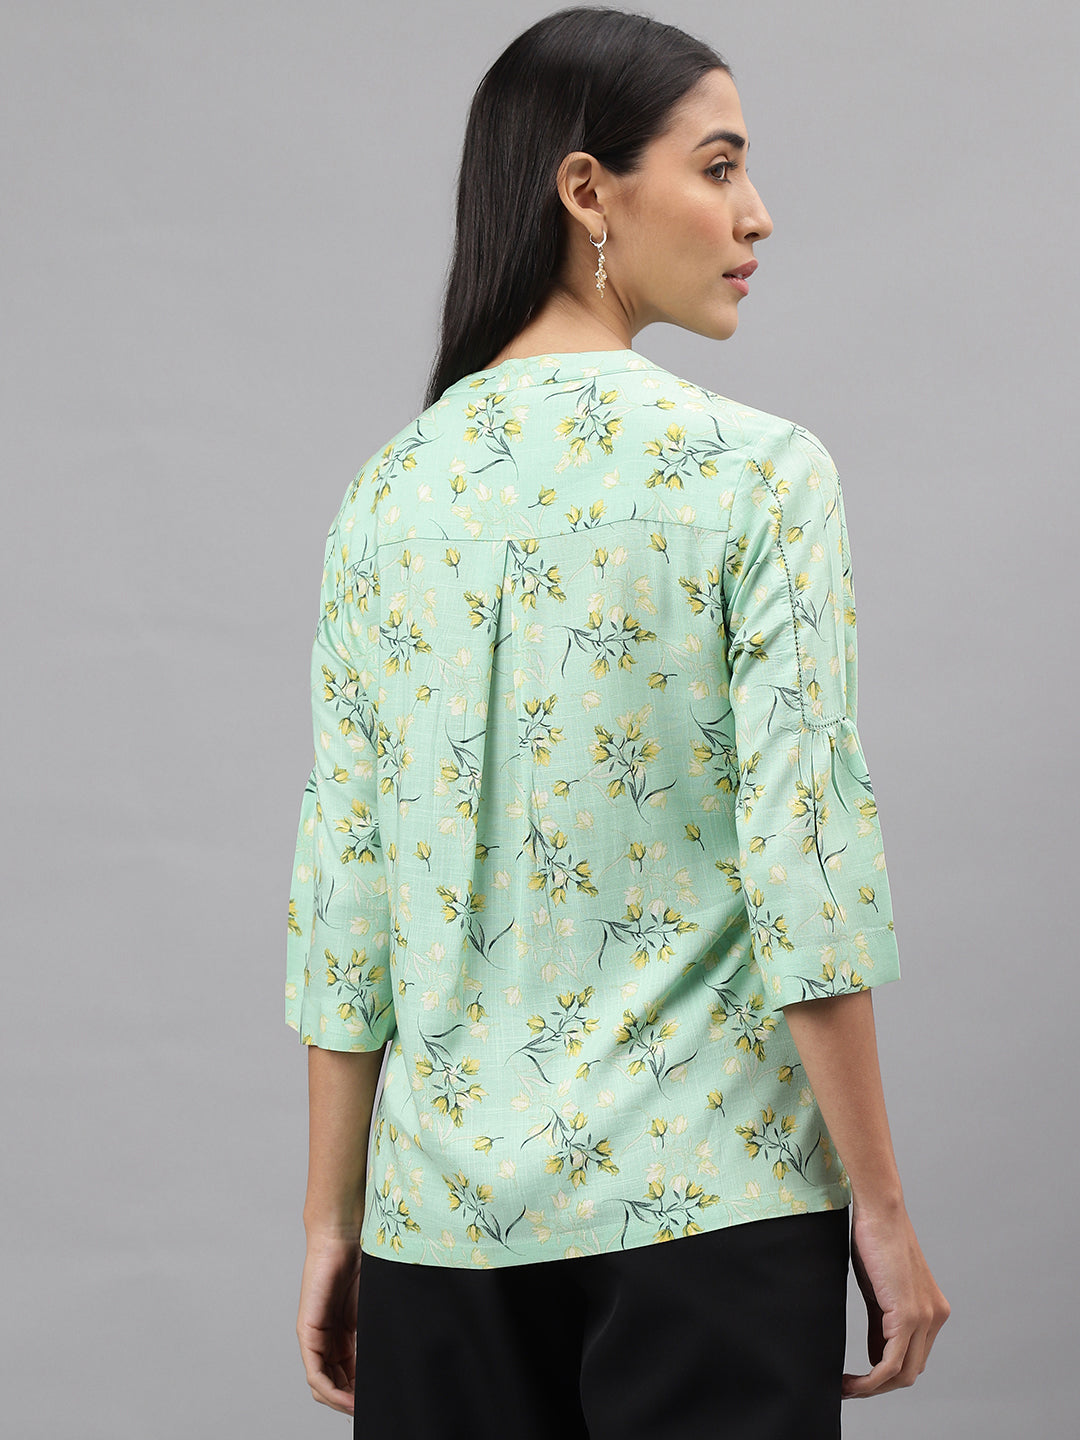 Green 3/4 Sleeve Round Neck Floral Print Blouse Top